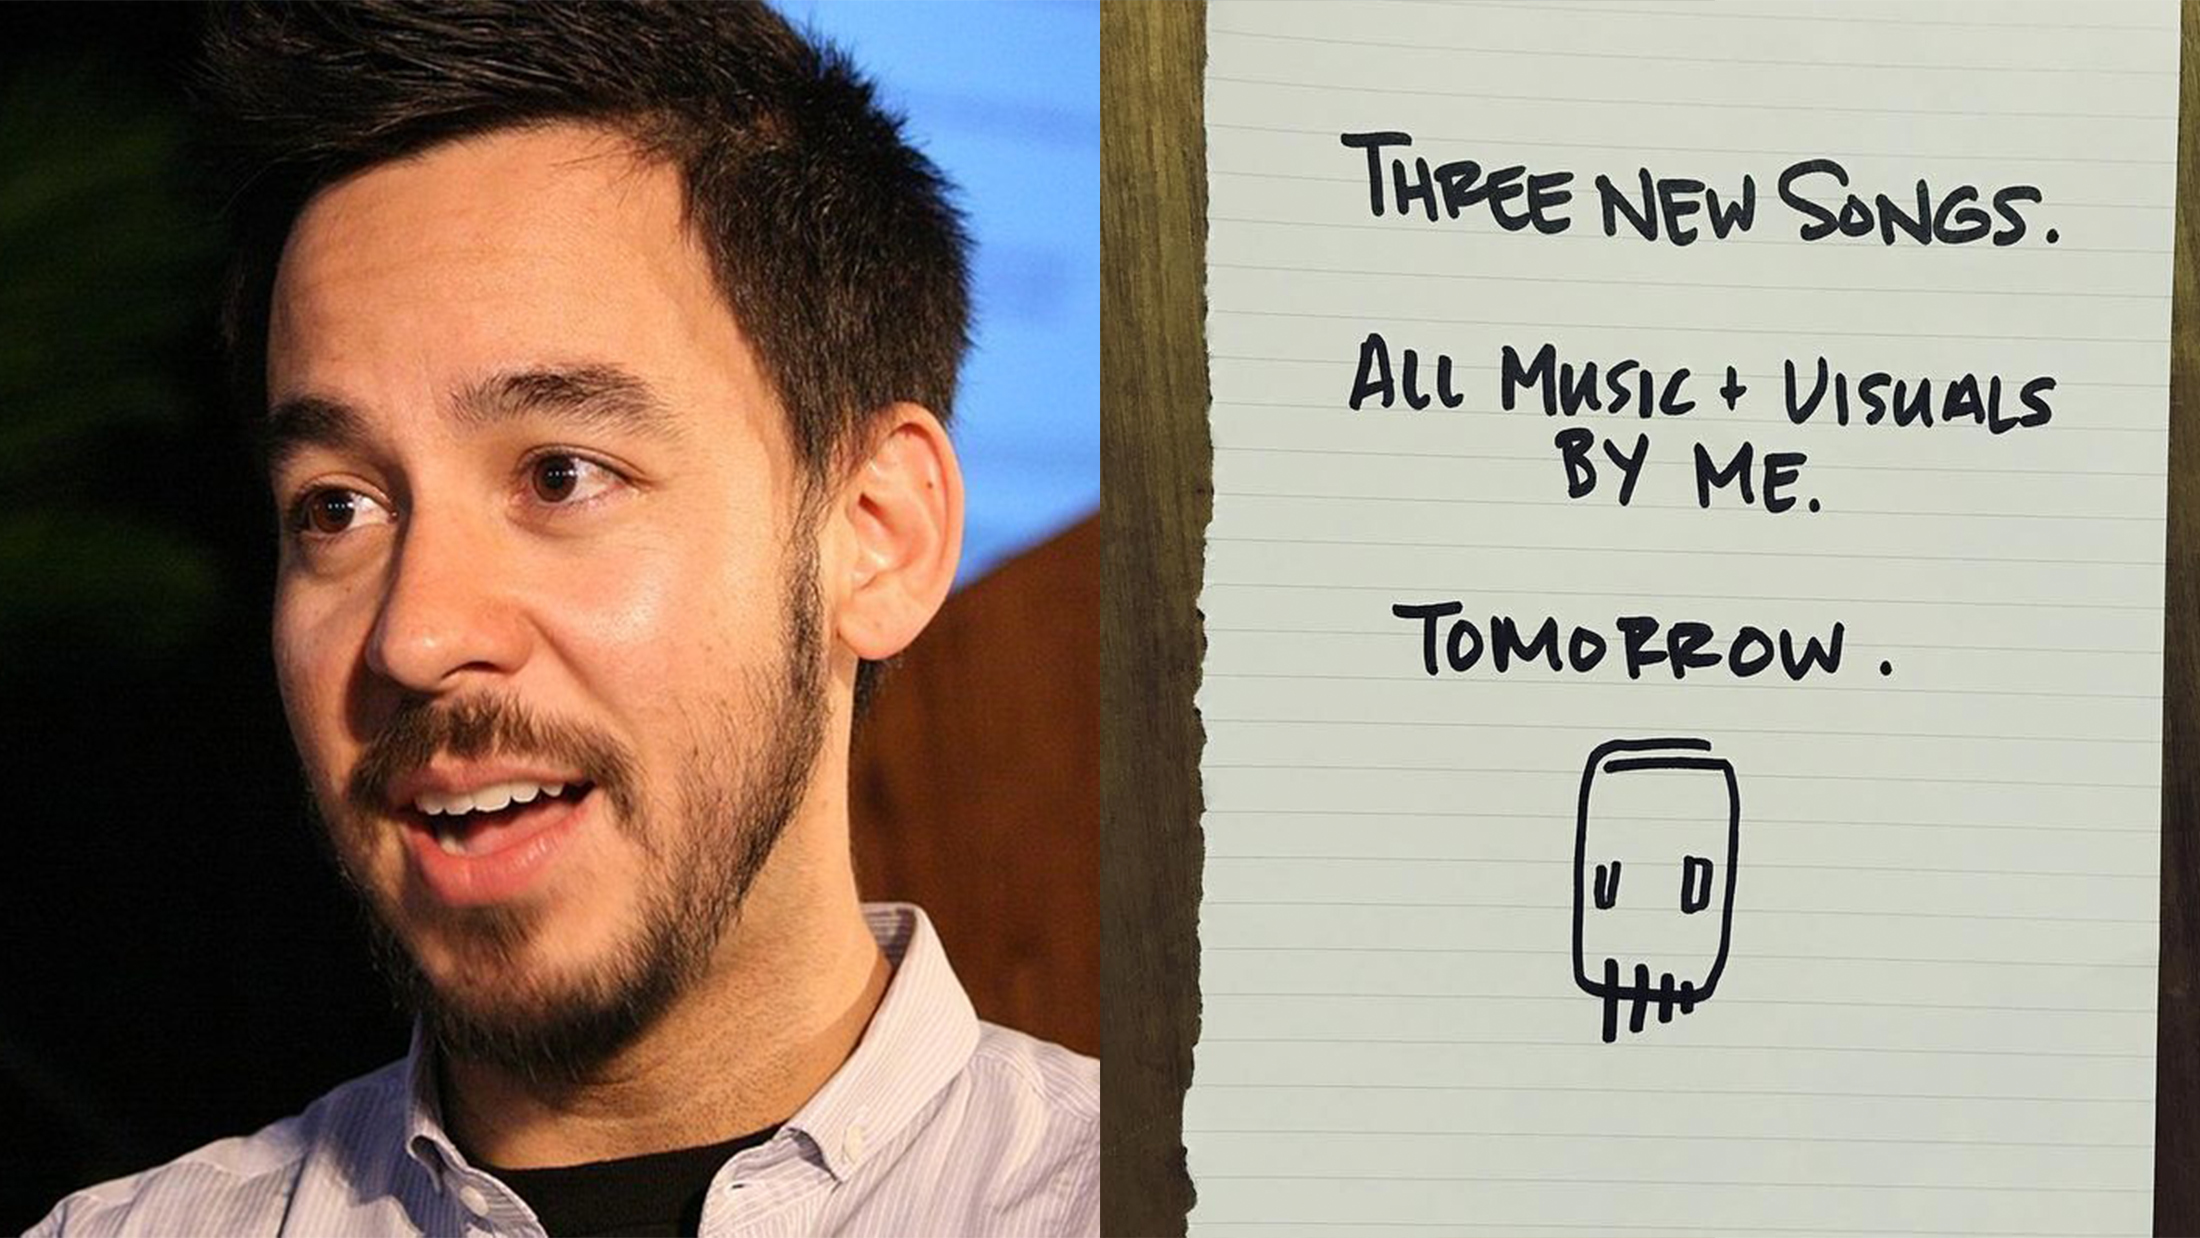 LINKIN PARK on Instagram: A note from @m_shinoda on his new song